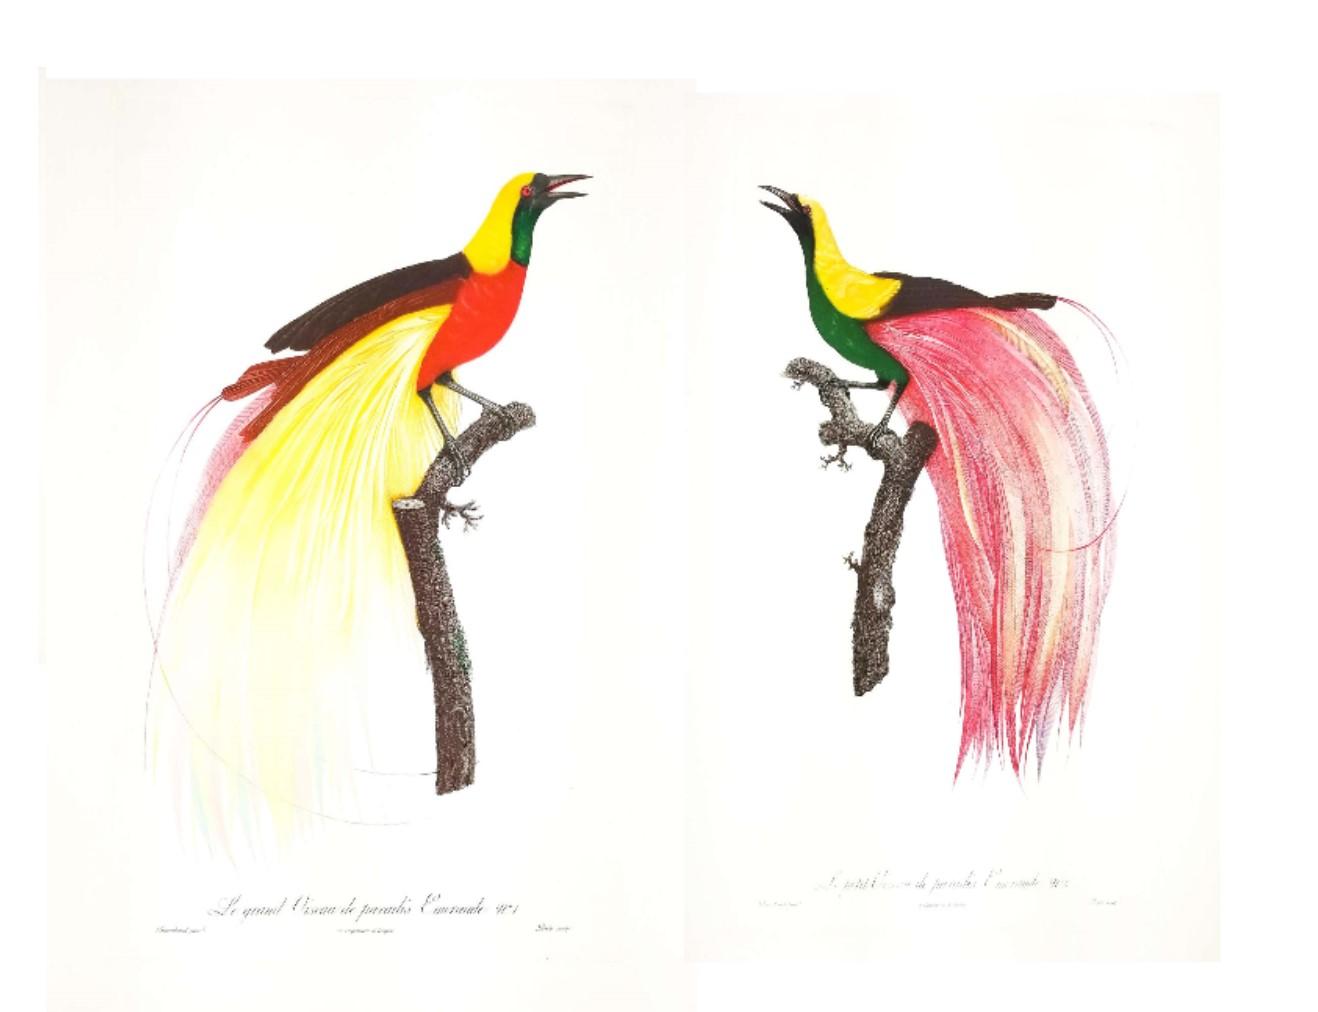 Jacques Barraband Animal Print - Duet of Big Birds of Paradise 1 and 2